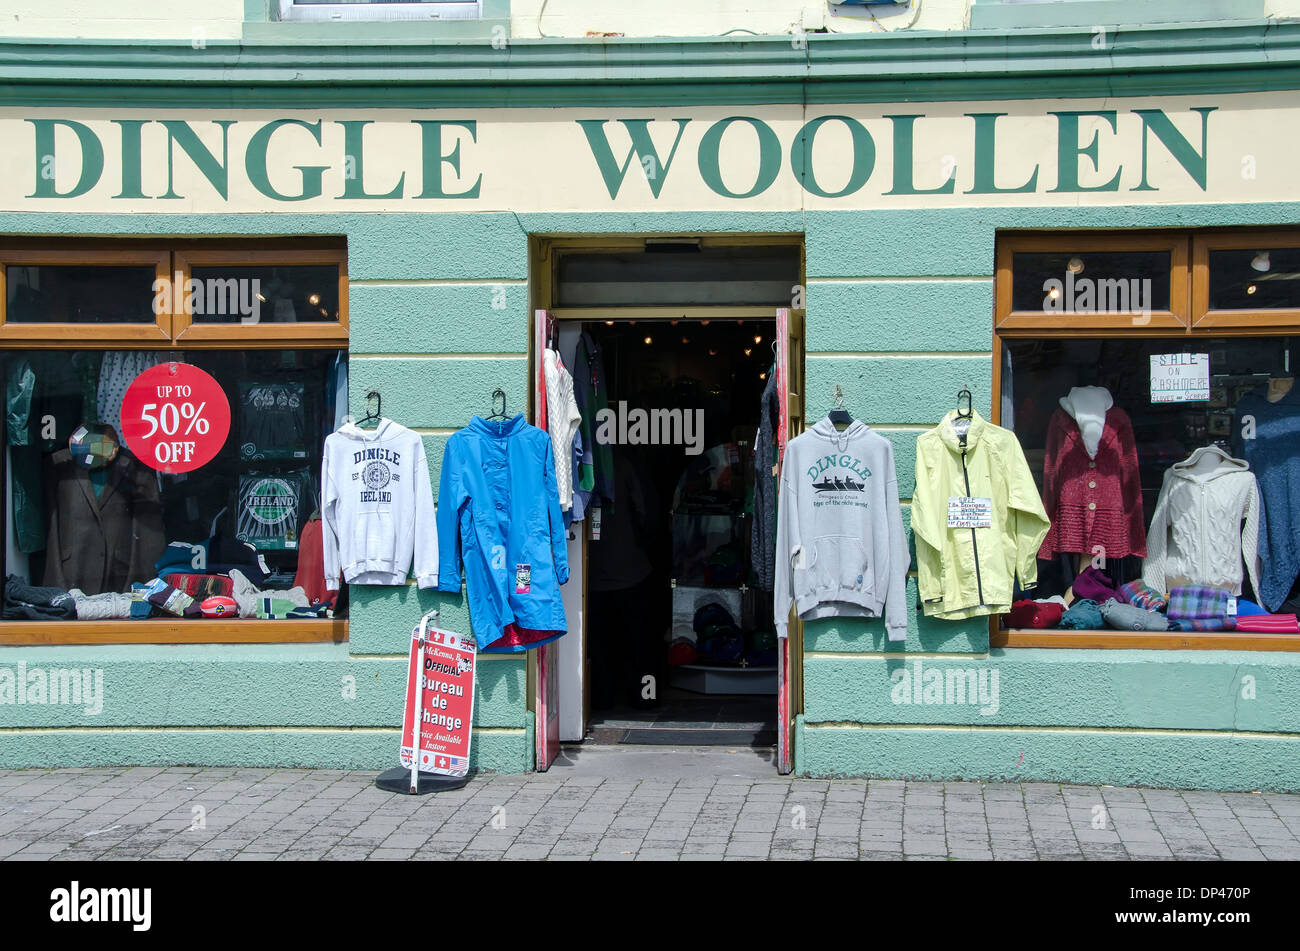 Exterior display of Dingle Woolen Company, Dingle town, County Kerry, Ireland Stock Photo